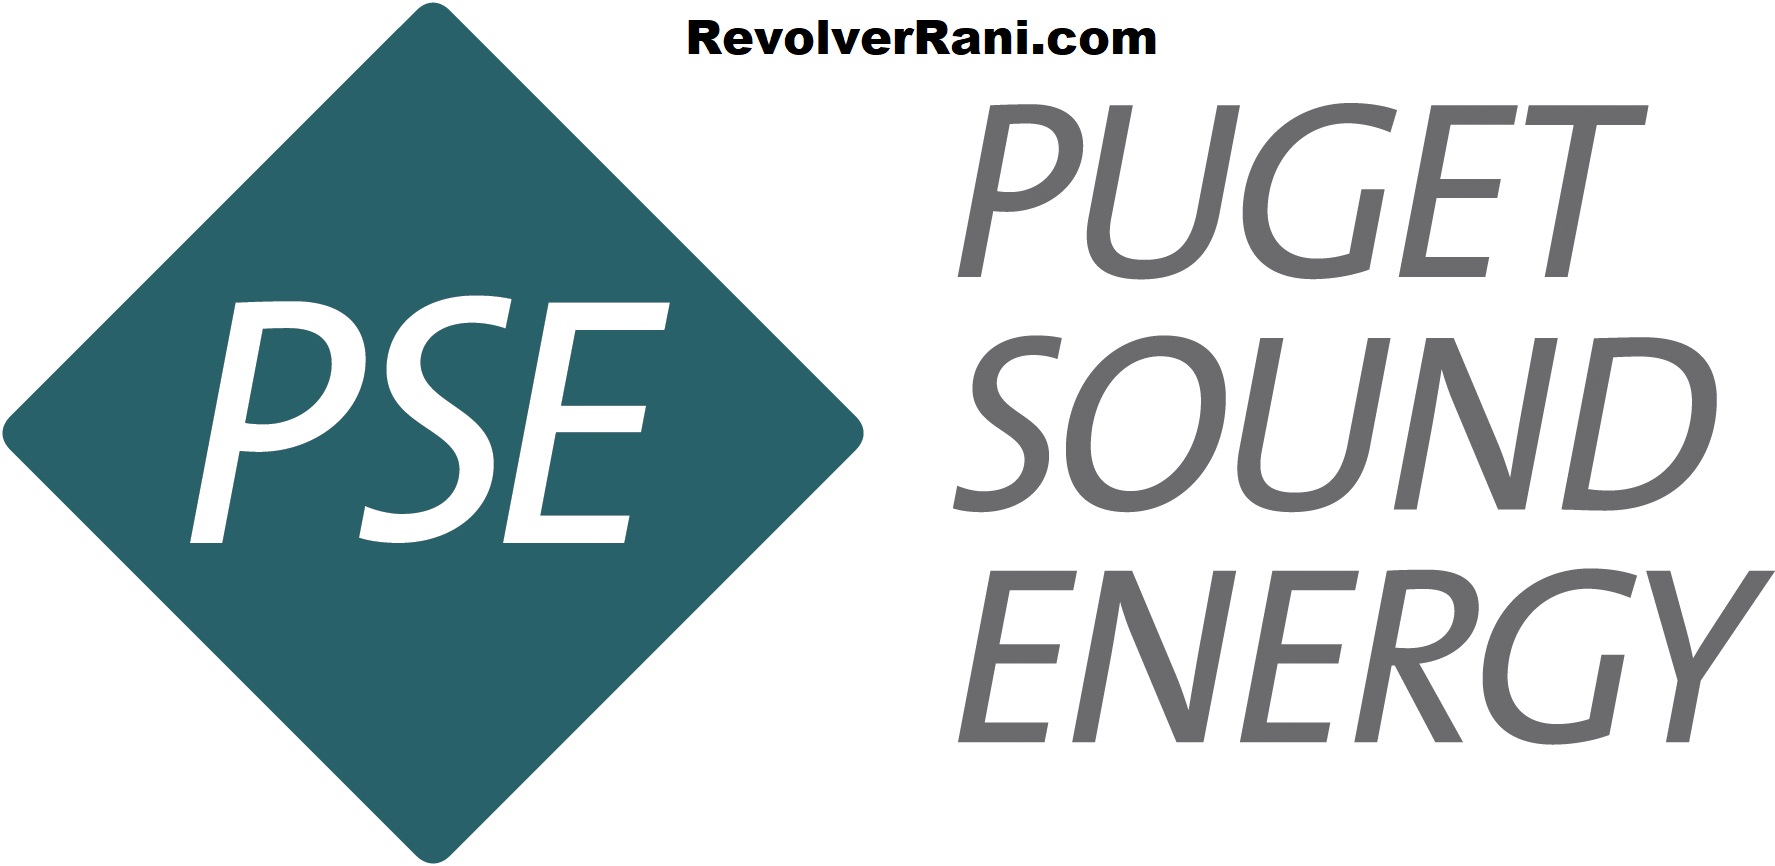 puget-sound-energy-login-2022-bill-pay-jobs-many-more